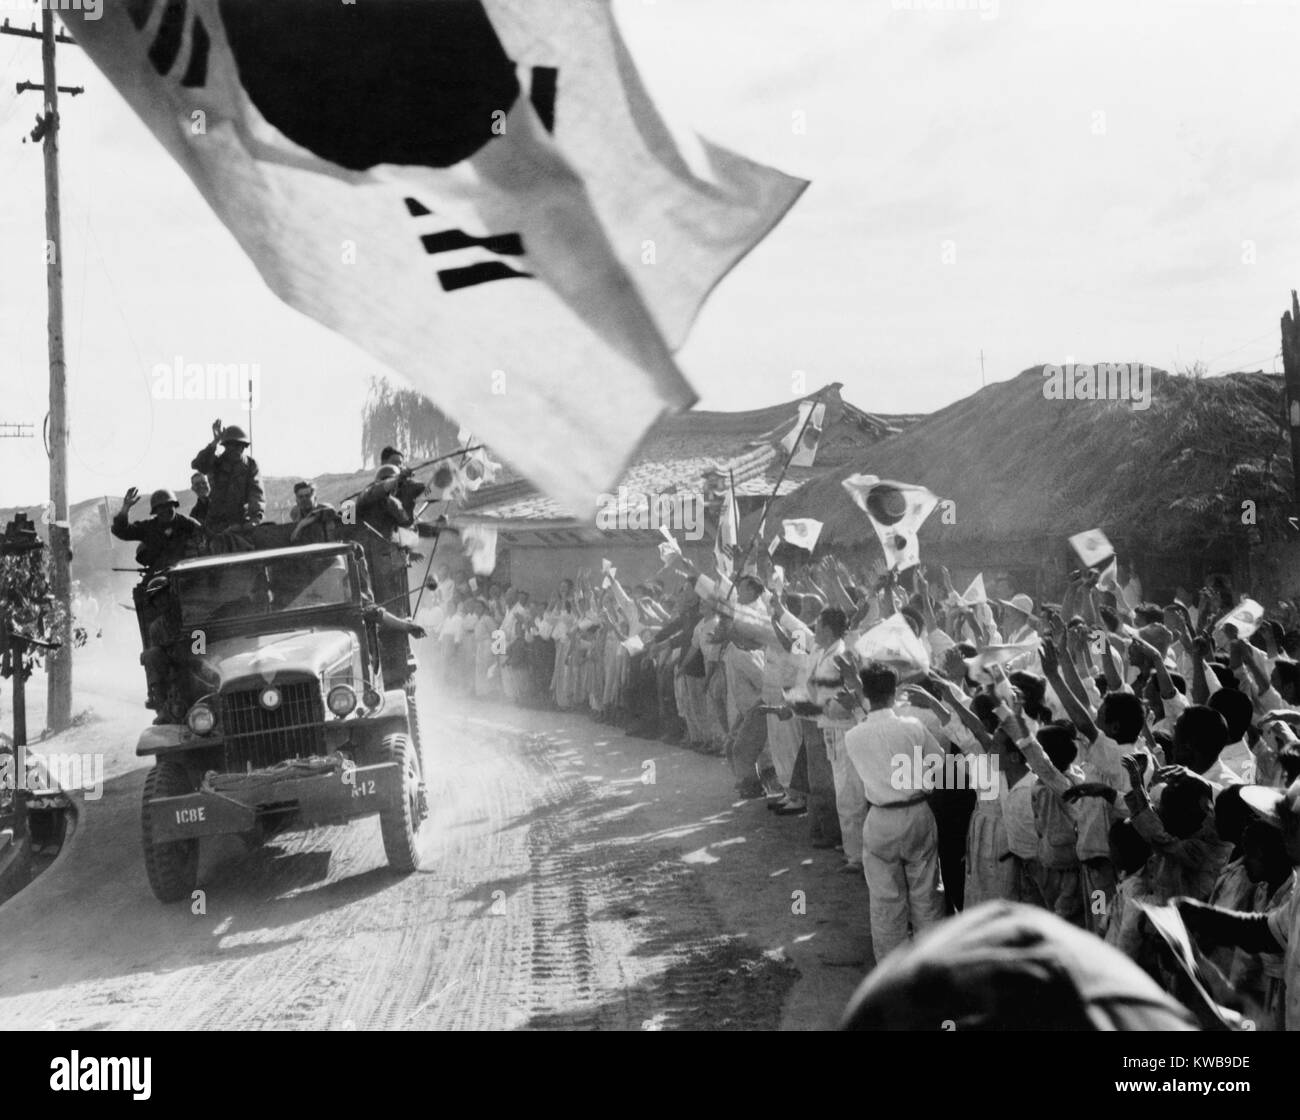 U.S. First Cavalry Division troops pass cheering Koreans north of Seoul on the way to the 38th parallel. A South Korean flag flies in foreground with smaller flags waved in the crowd. Ca. Oct. 9, 1950. Korean War, 1950-53. (BSLOC 2014 11 64) Stock Photo